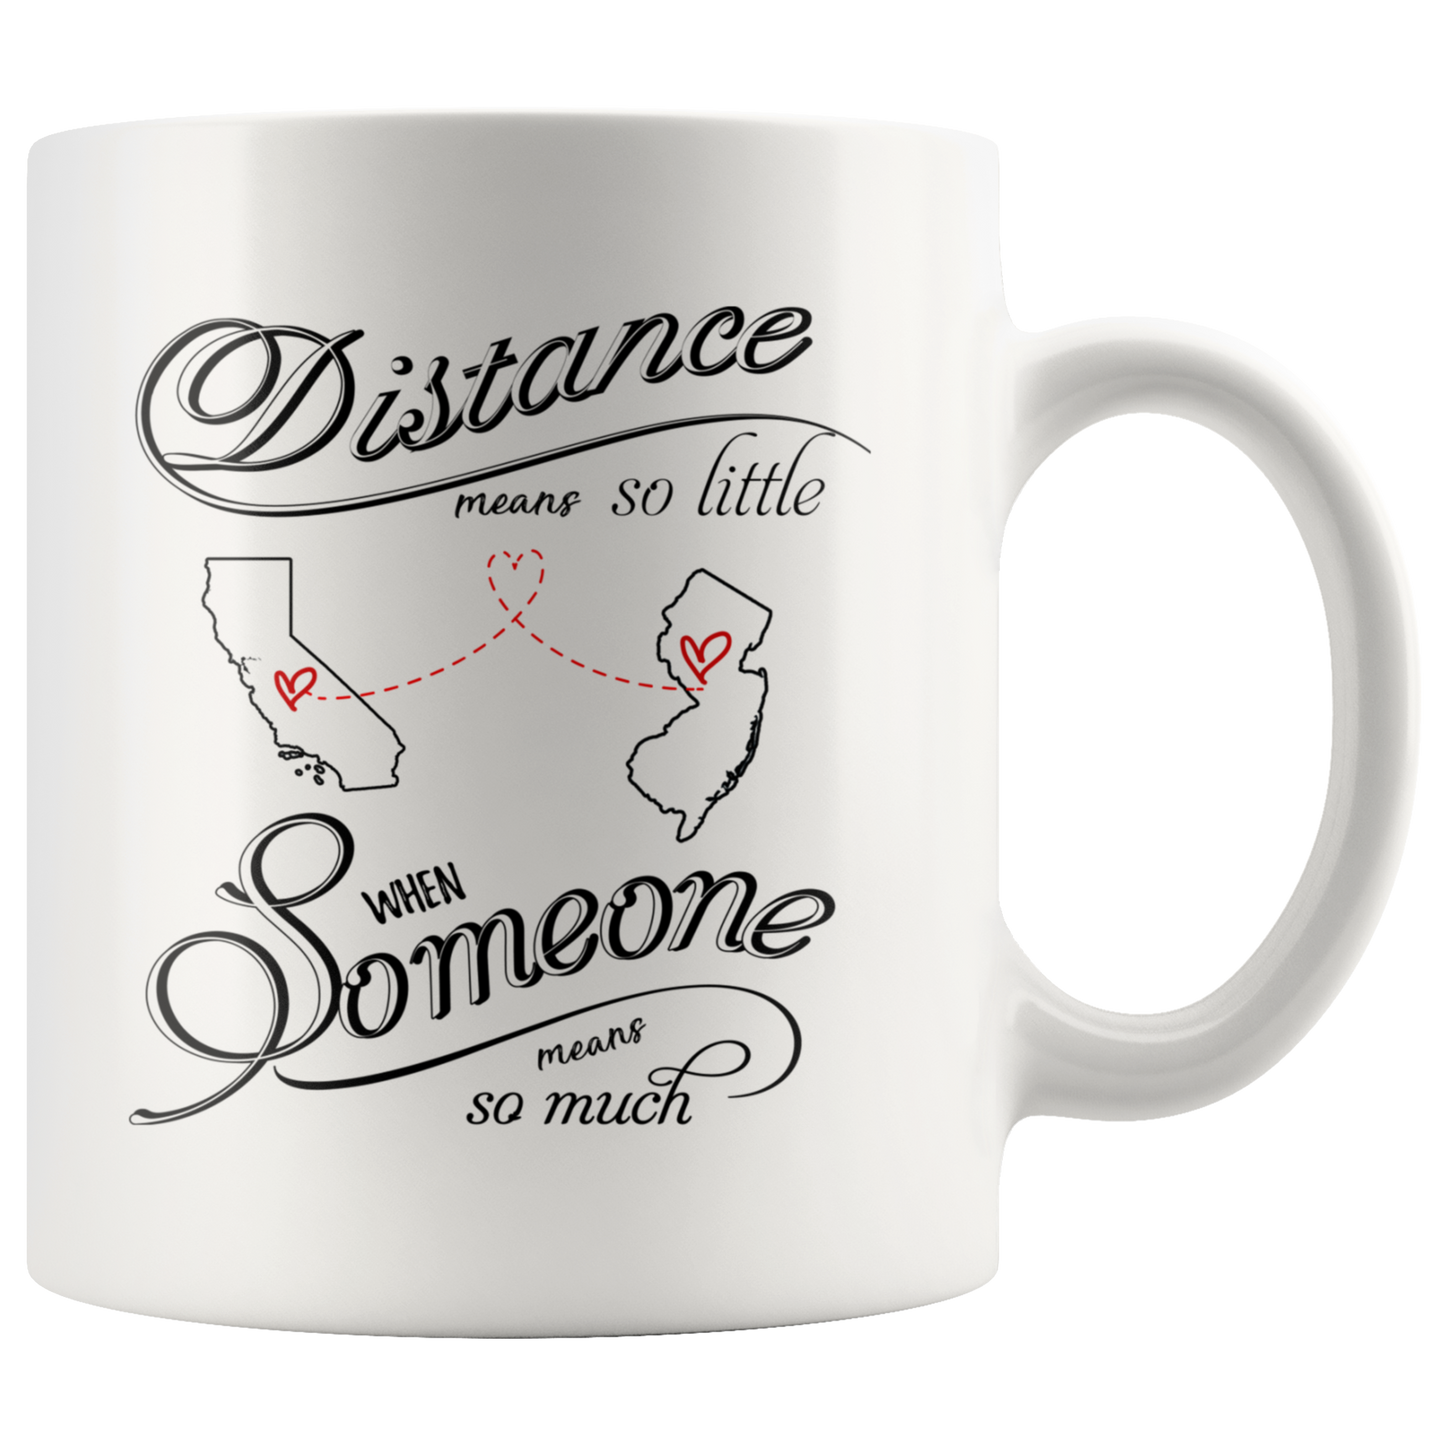 M-20484773-sp-22819 - Mothers Day Coffee Mug California New Jersey Distance Means